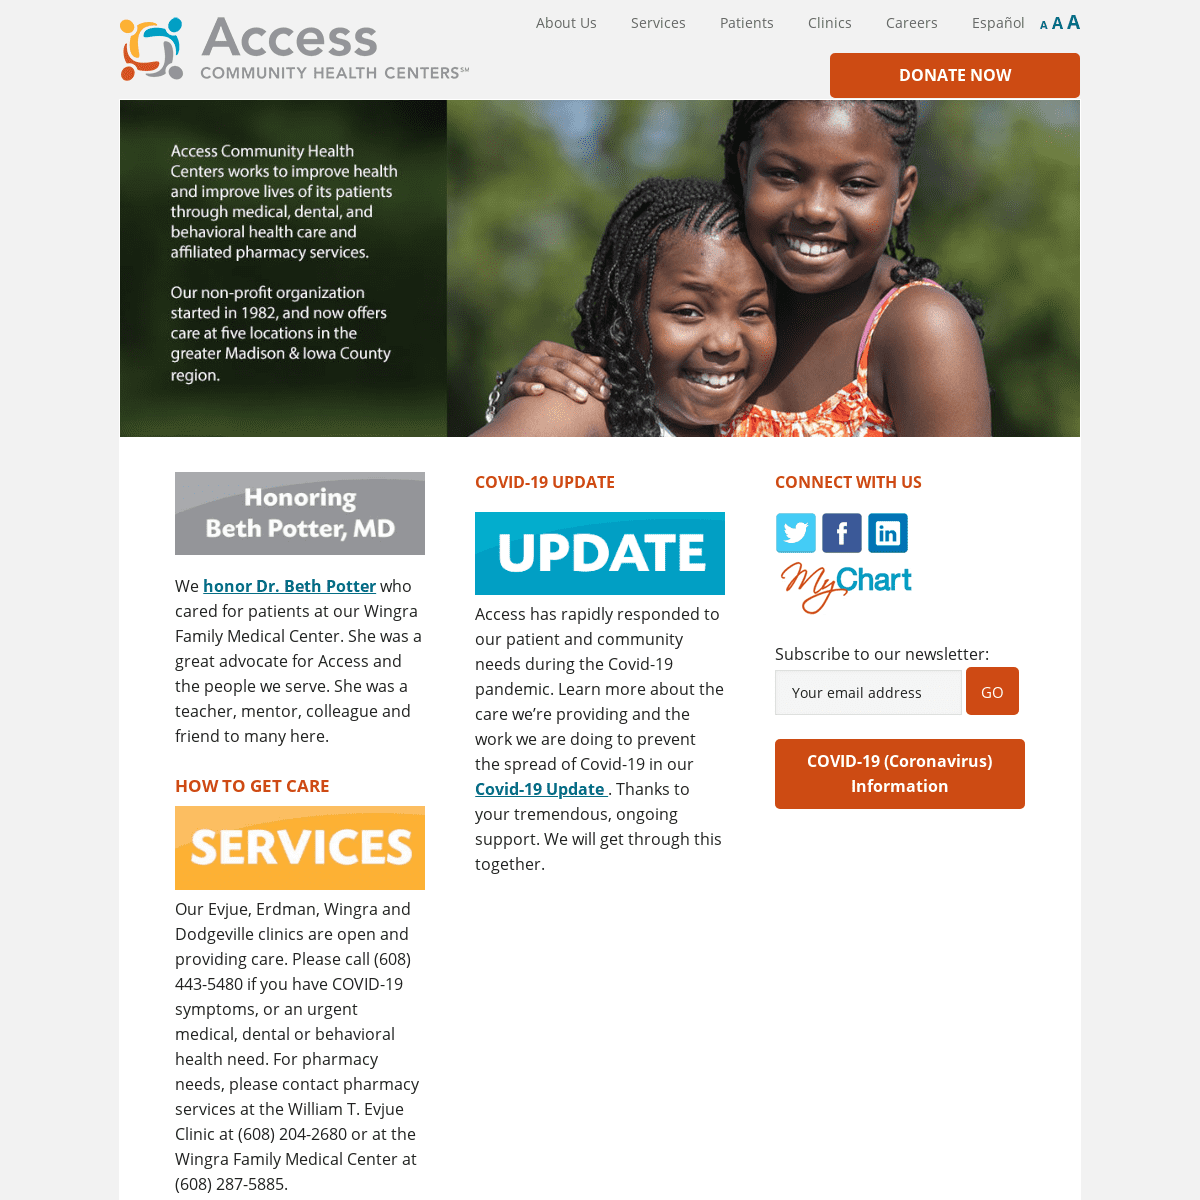 A complete backup of accesscommunityhealthcenters.org